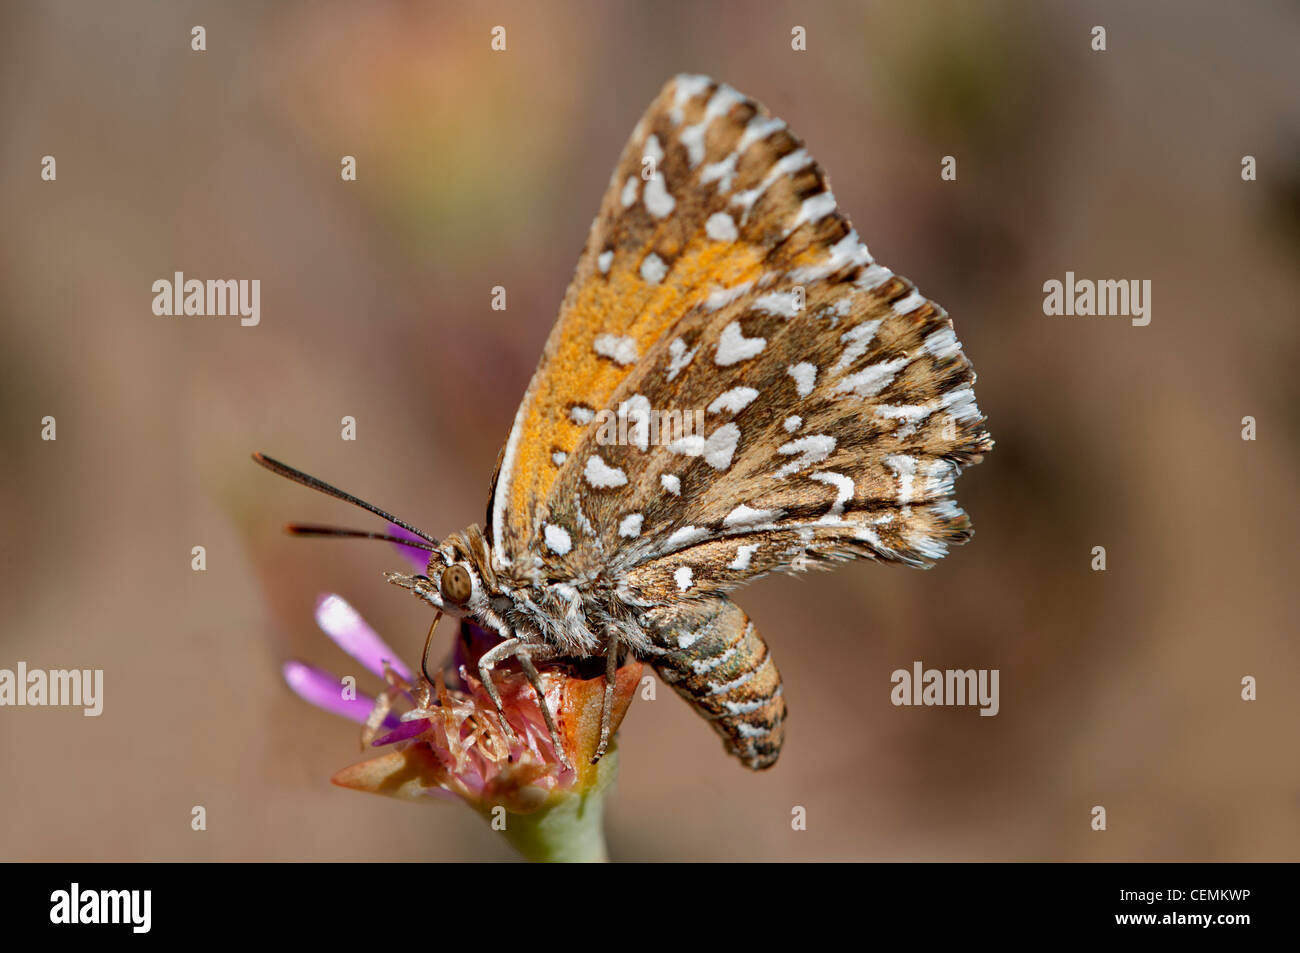 Large Silver-spotted Copper, Trimenia argyroplaga, indigenous butterfly species of South Africa, Namaqualand, South Africa Stock Photo